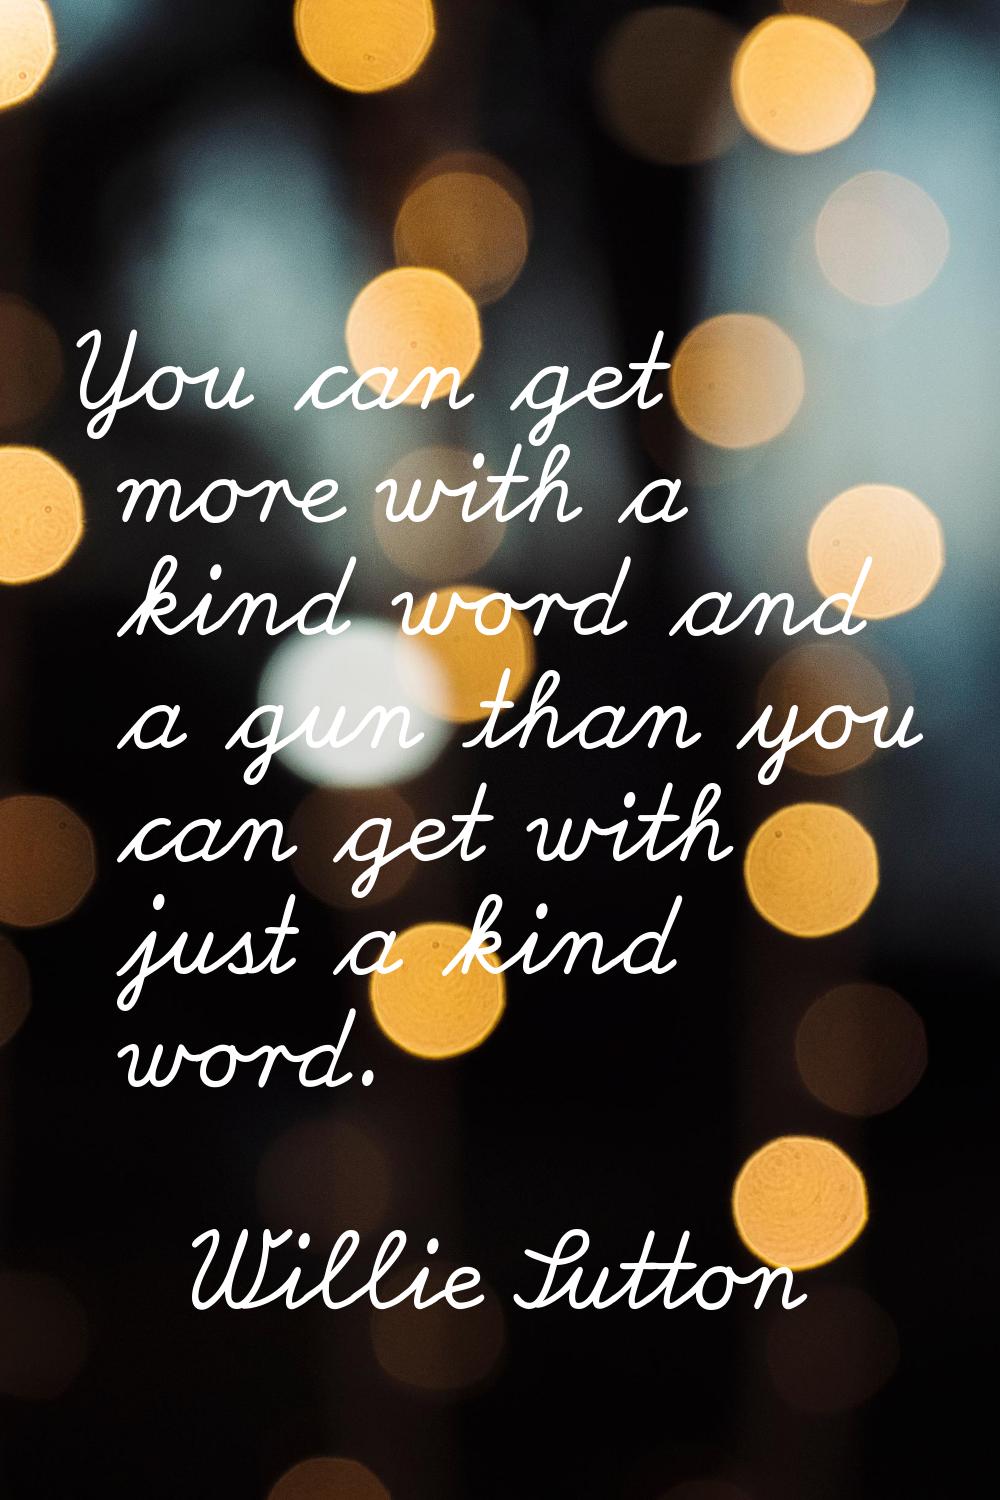 You can get more with a kind word and a gun than you can get with just a kind word.